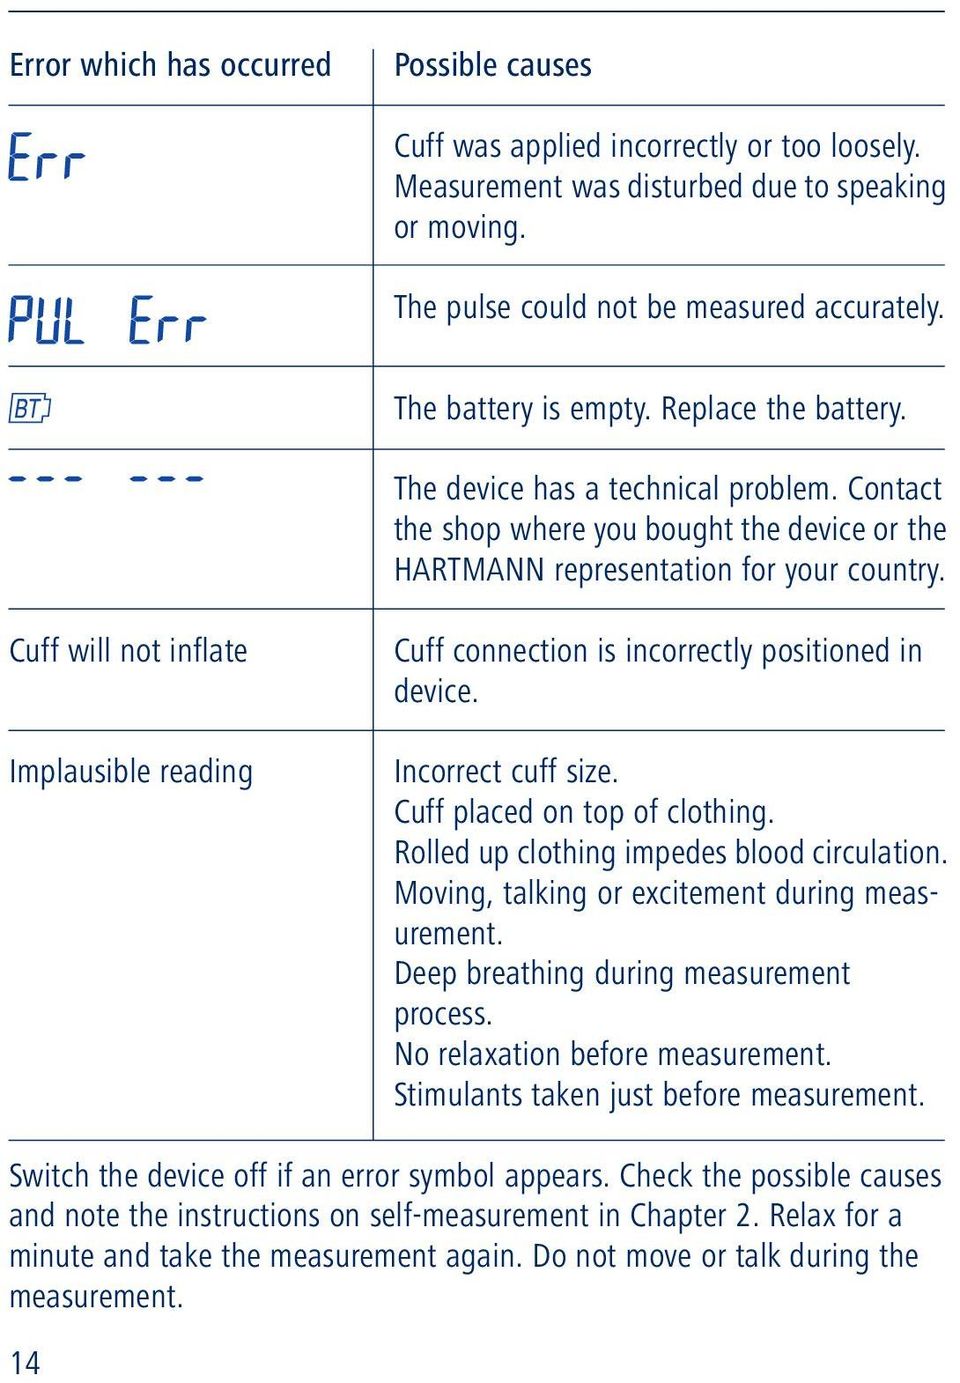 Cuff will not inflate Implausible reading Cuff connection is incorrectly positioned in device. Incorrect cuff size. Cuff placed on top of clothing. Rolled up clothing impedes blood circulation.